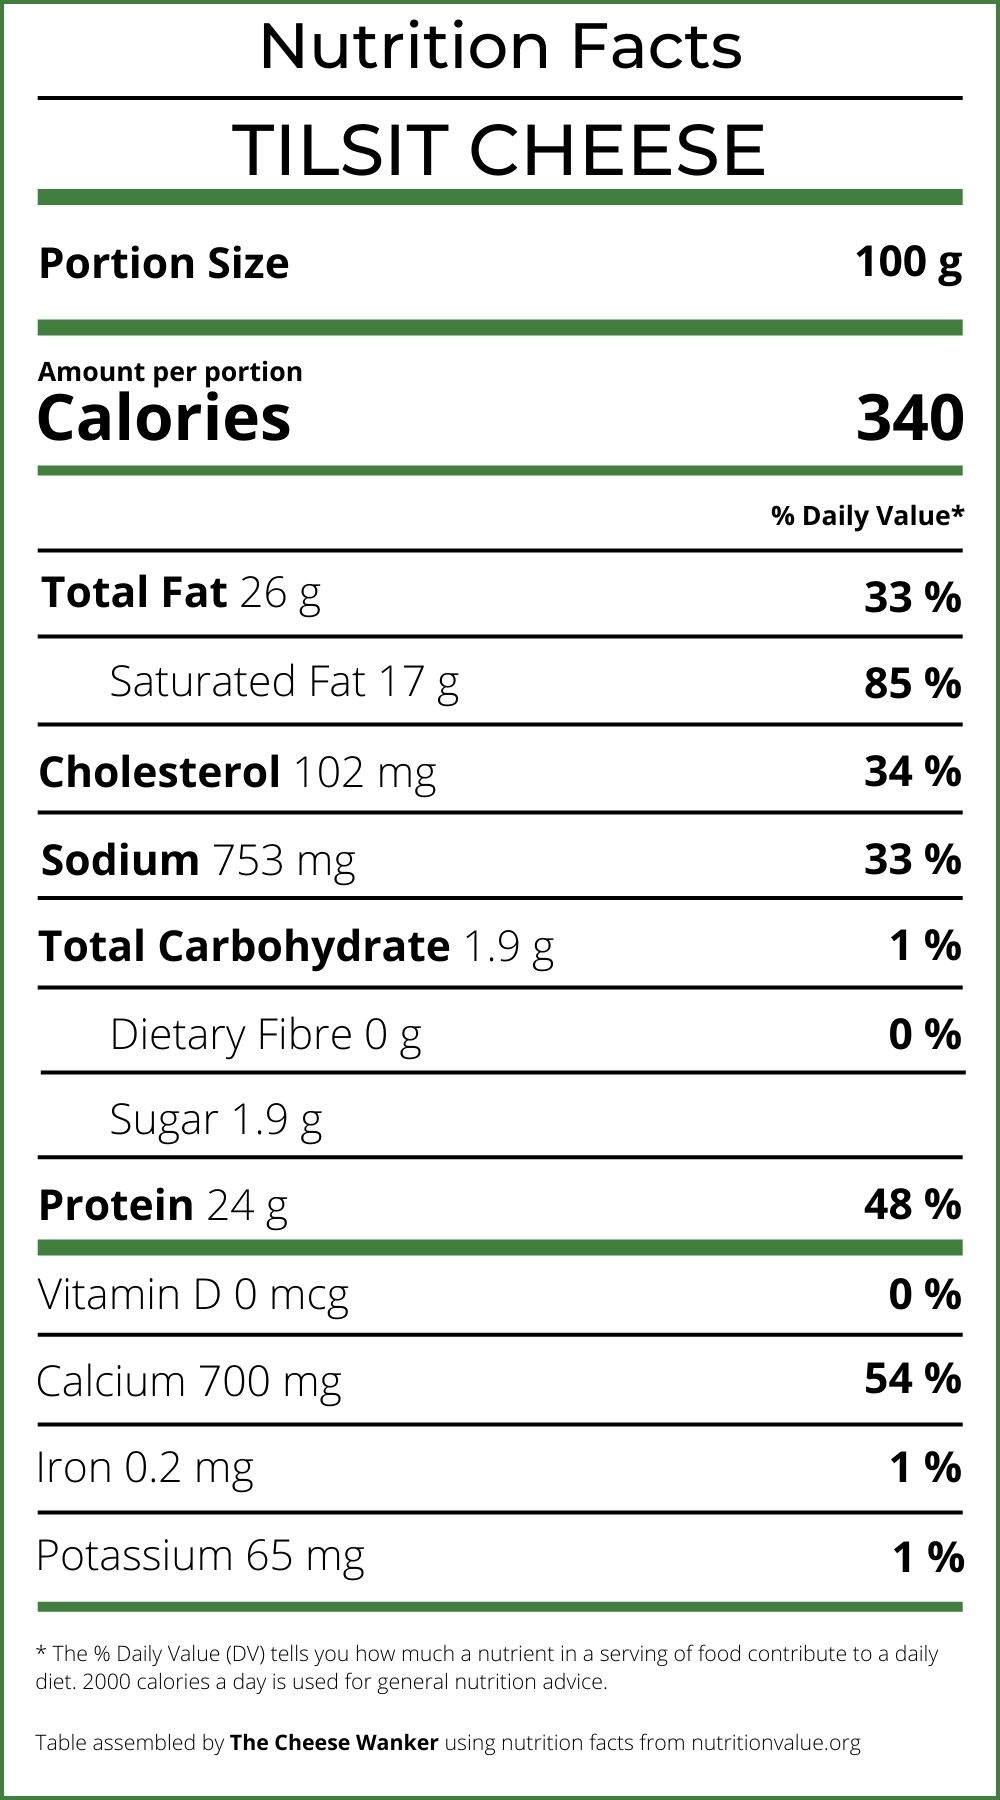 Nutrition Facts Tilsit Cheese